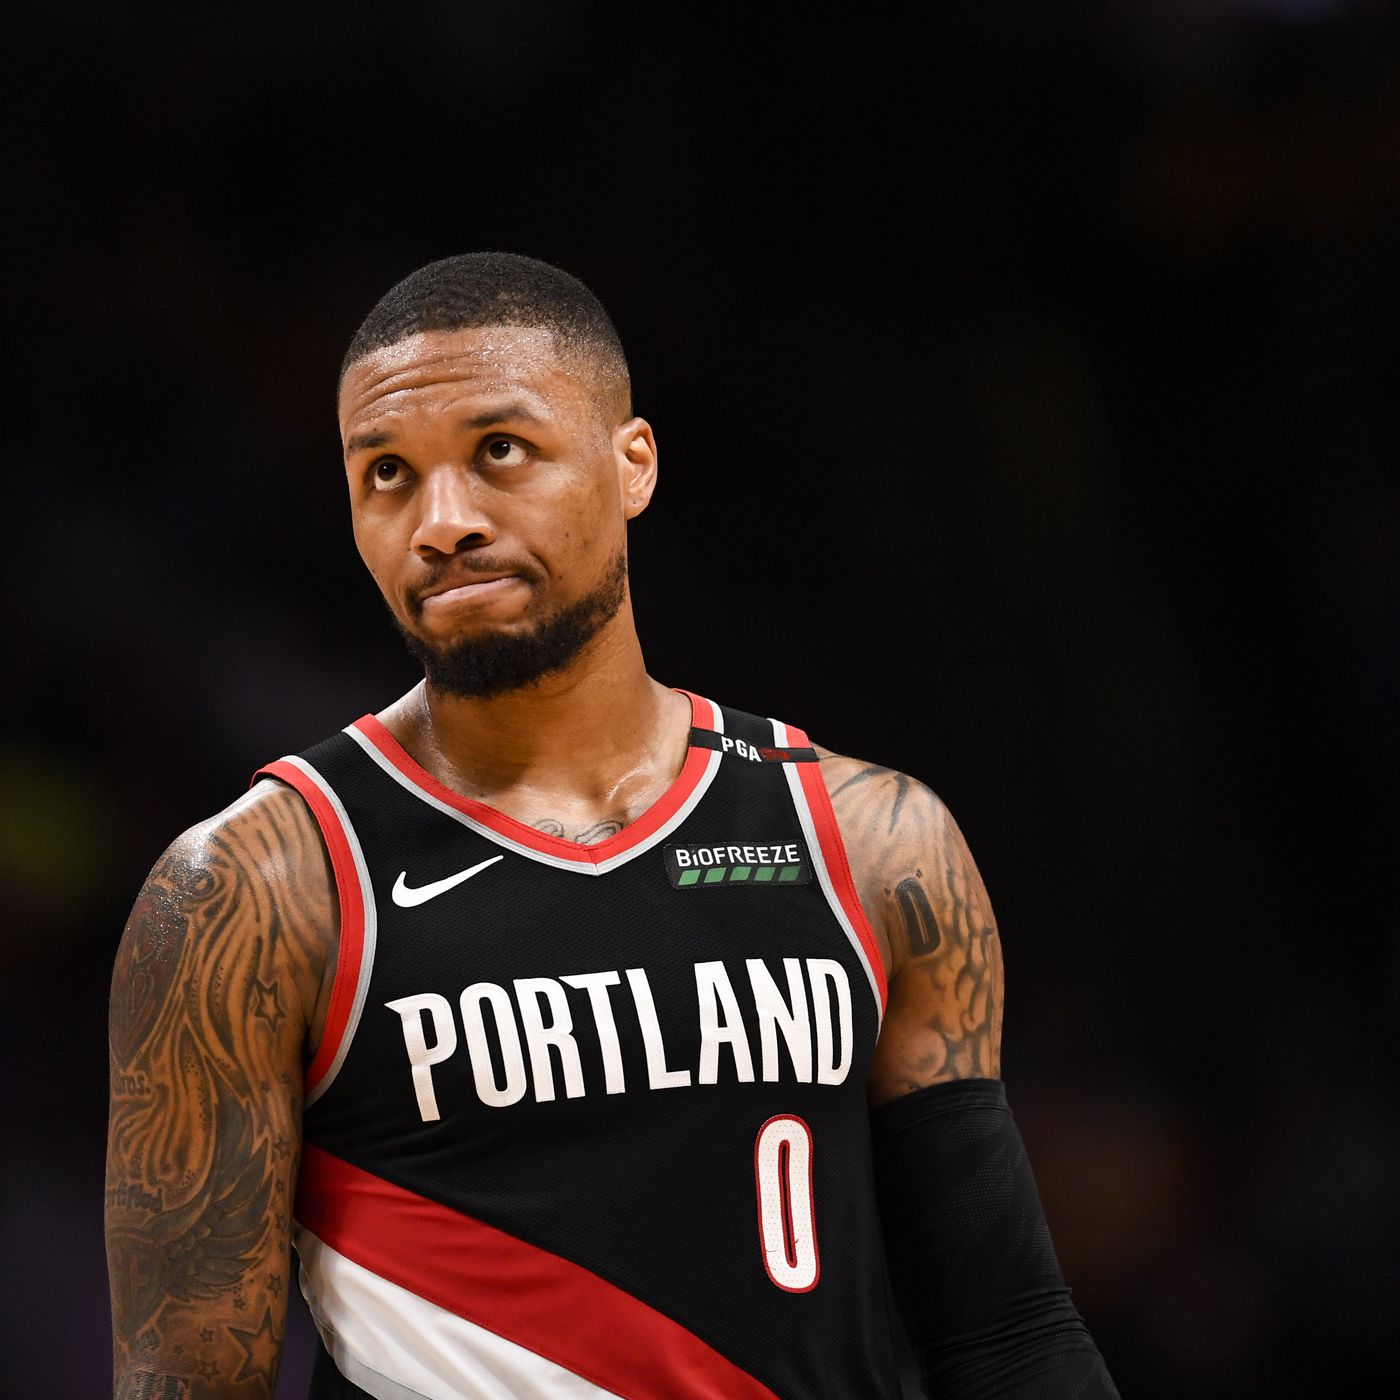 What's in a number? Why Trail Blazers players chose the jersey